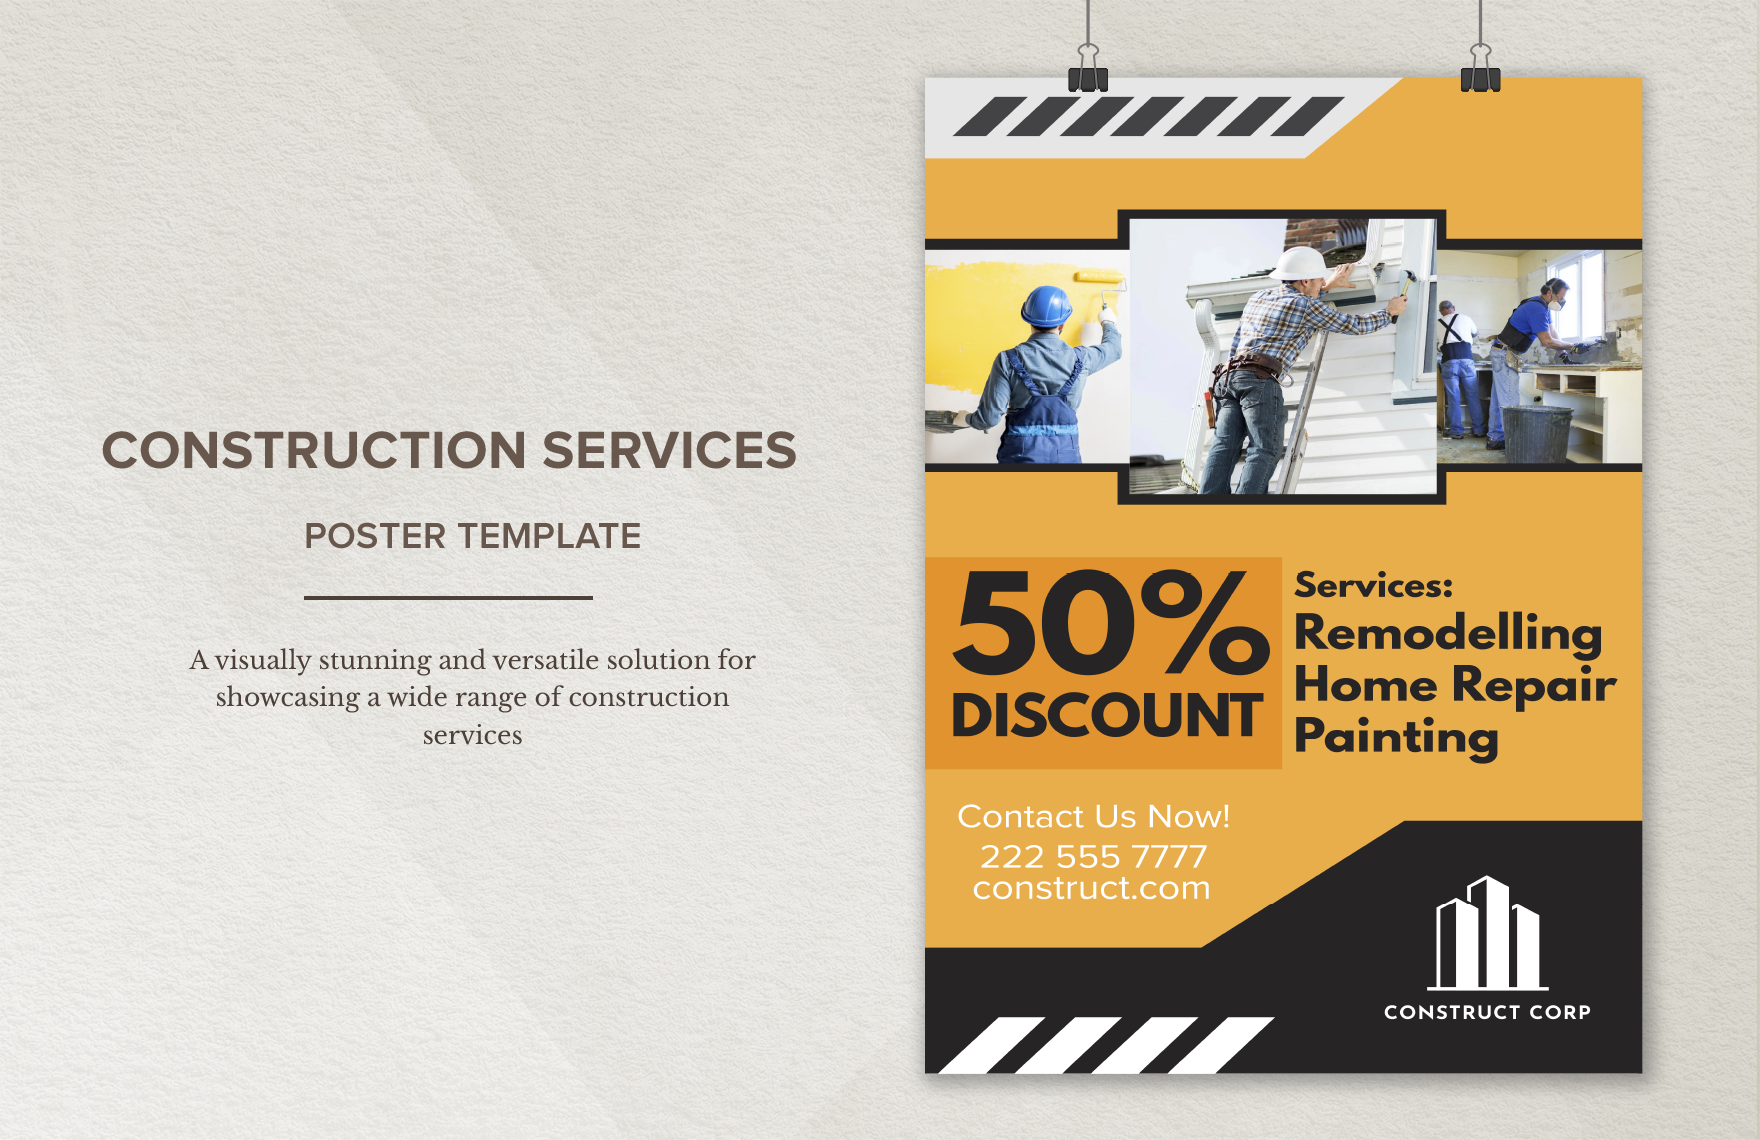 Construction Services Poster Template